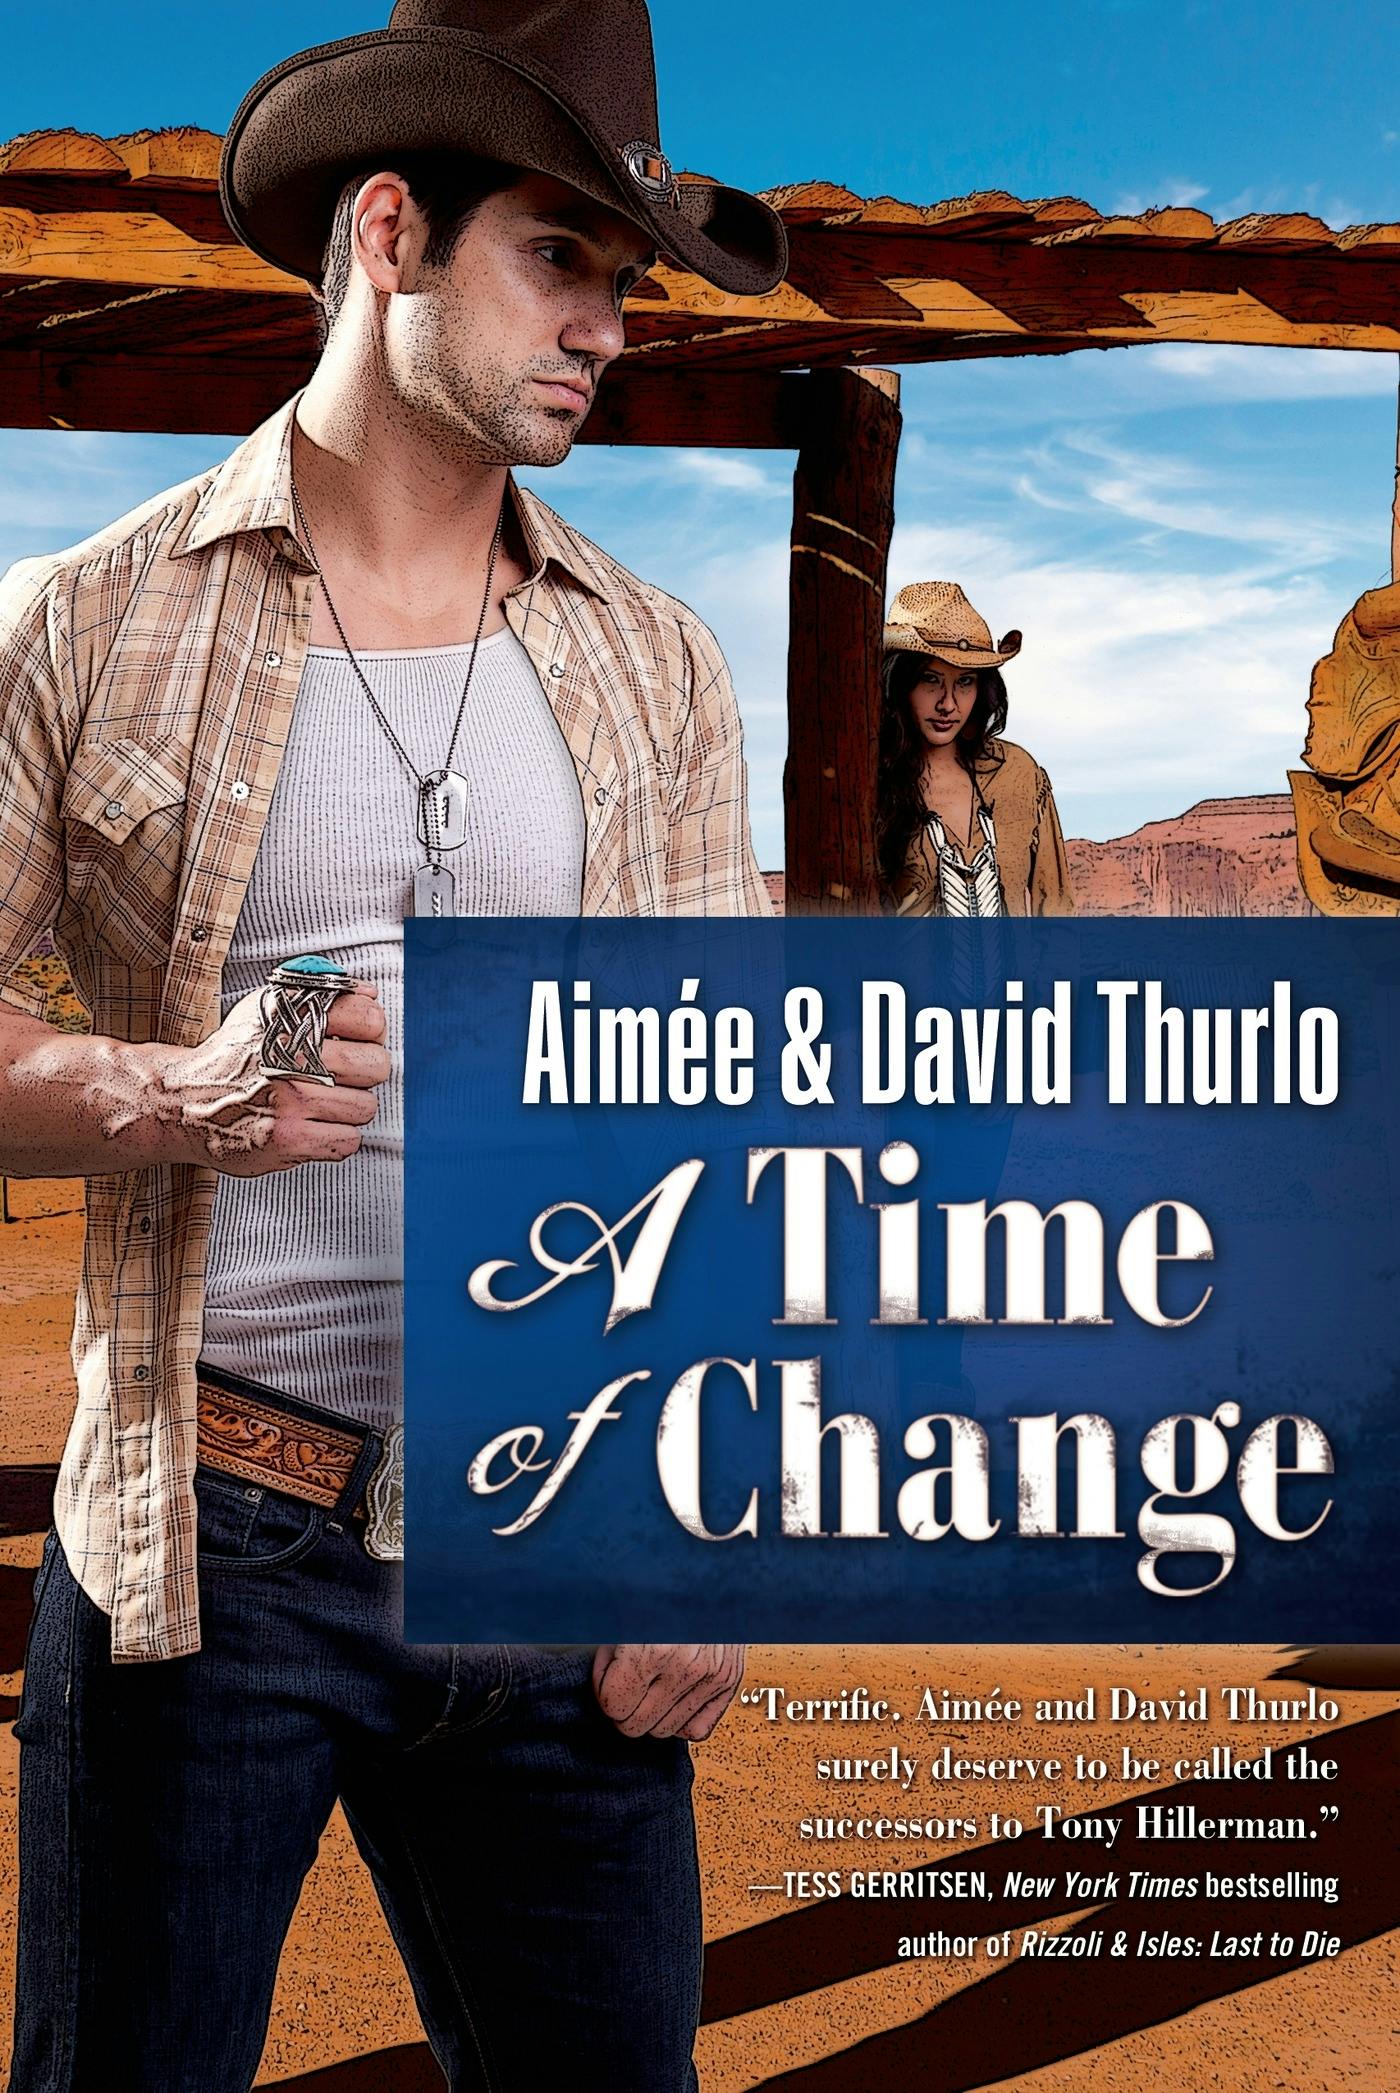 Cover for the book titled as: A Time of Change